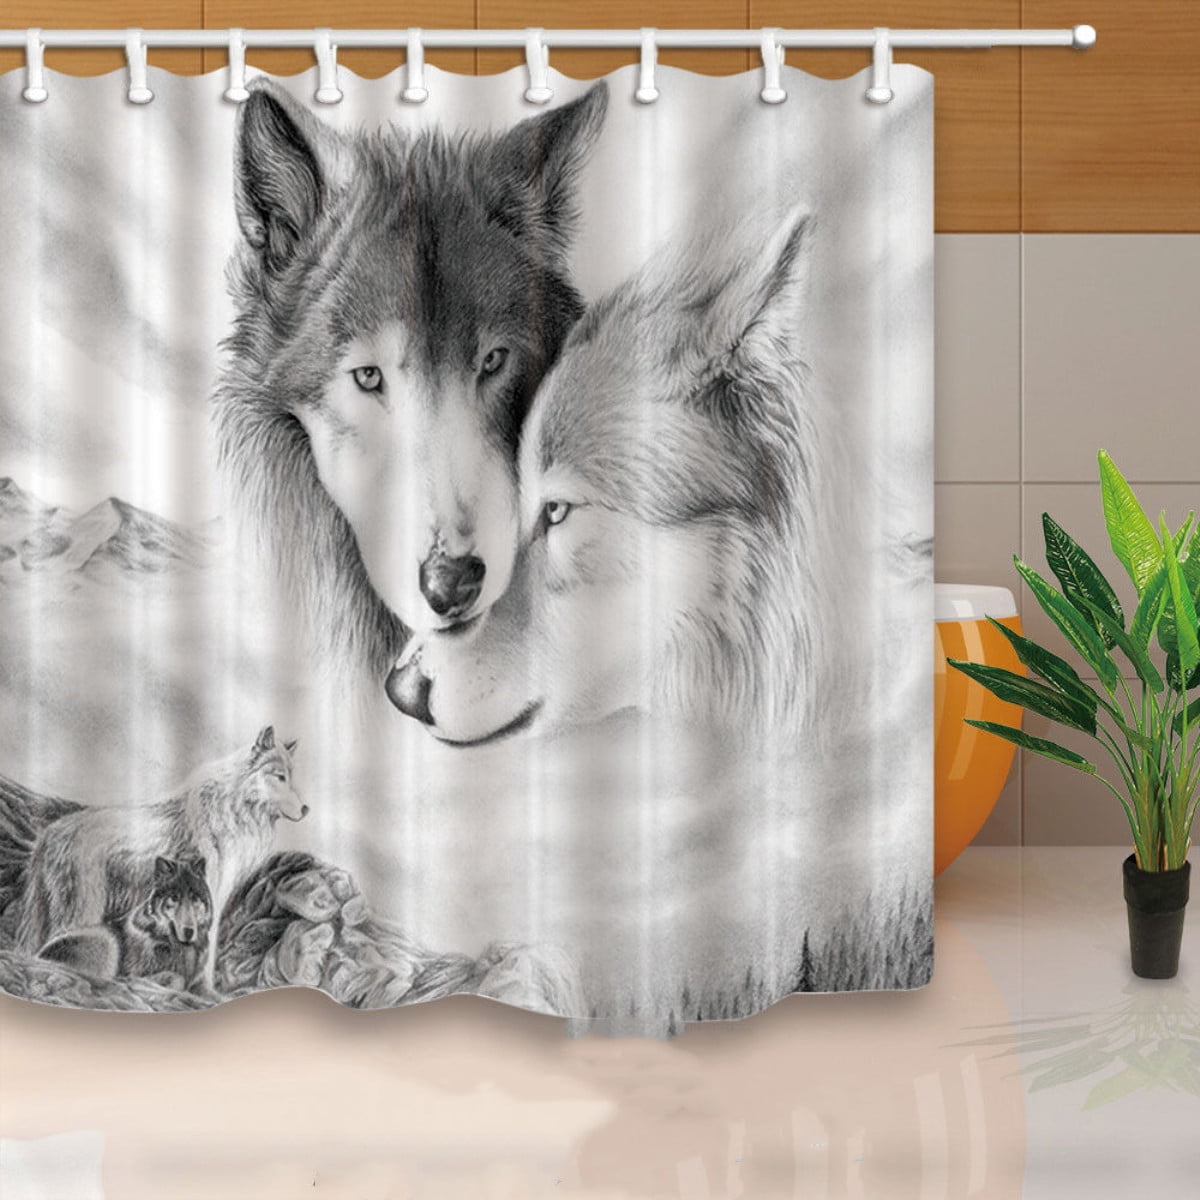 Home Decor Polyester Shower Curtain with Hooks Set of 2 Wolves Printed 